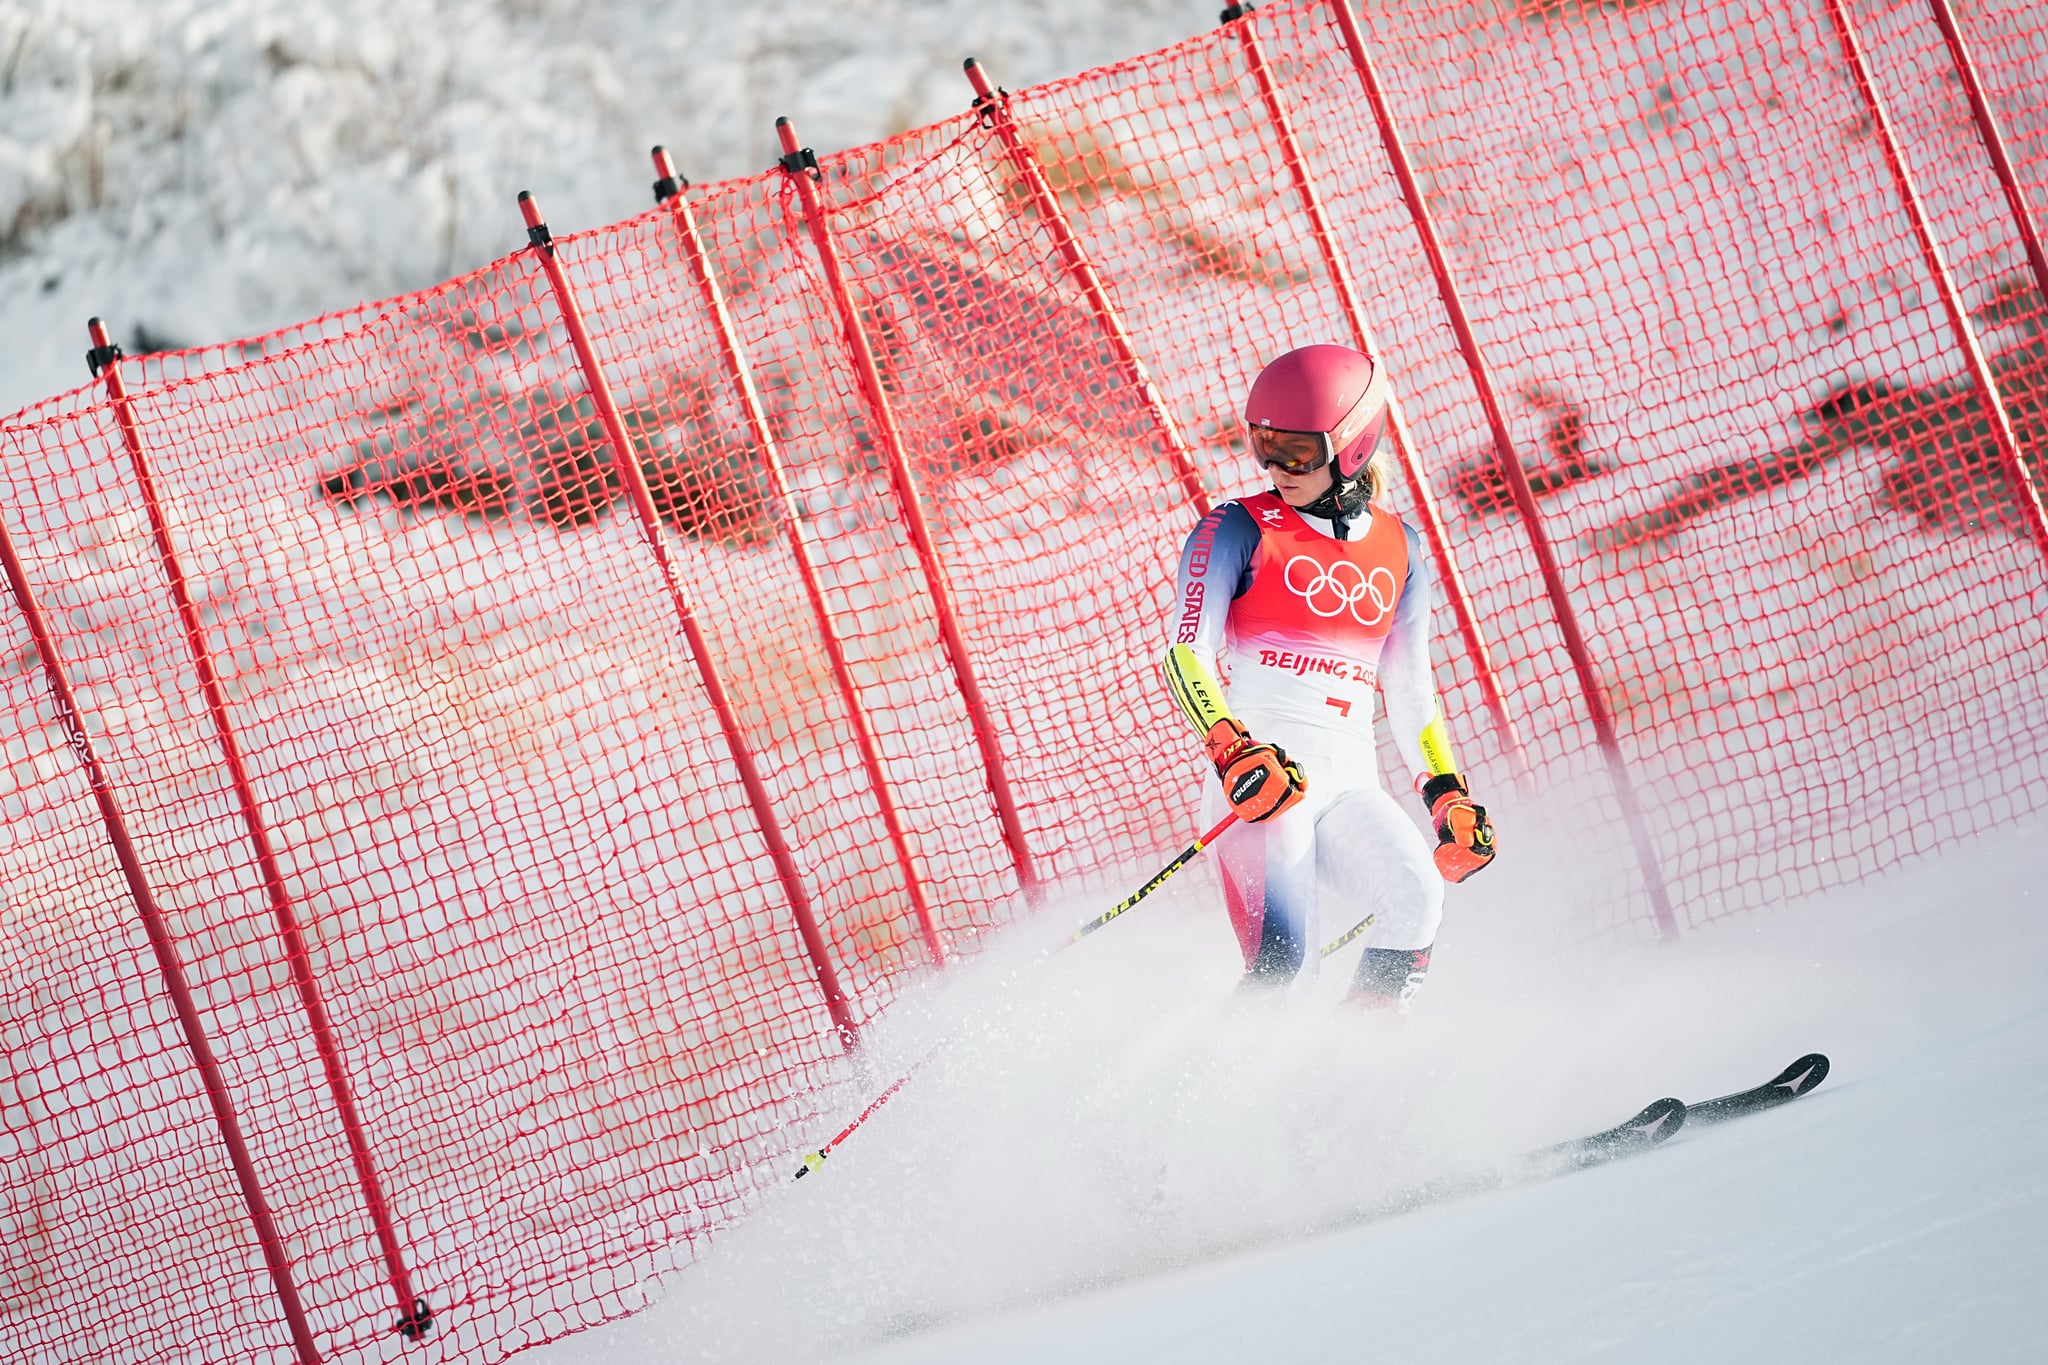 07 February 2022, China, Yanqing: Olympics, Alpine skiing, giant slalom, women, 1st run at the National Alpine Ski Center. Mikaela Shiffrin from the USA is standing next to the course and has dropped out. Photo: Michael Kappeler/dpa (Photo by Michael Kappeler/picture alliance via Getty Images)